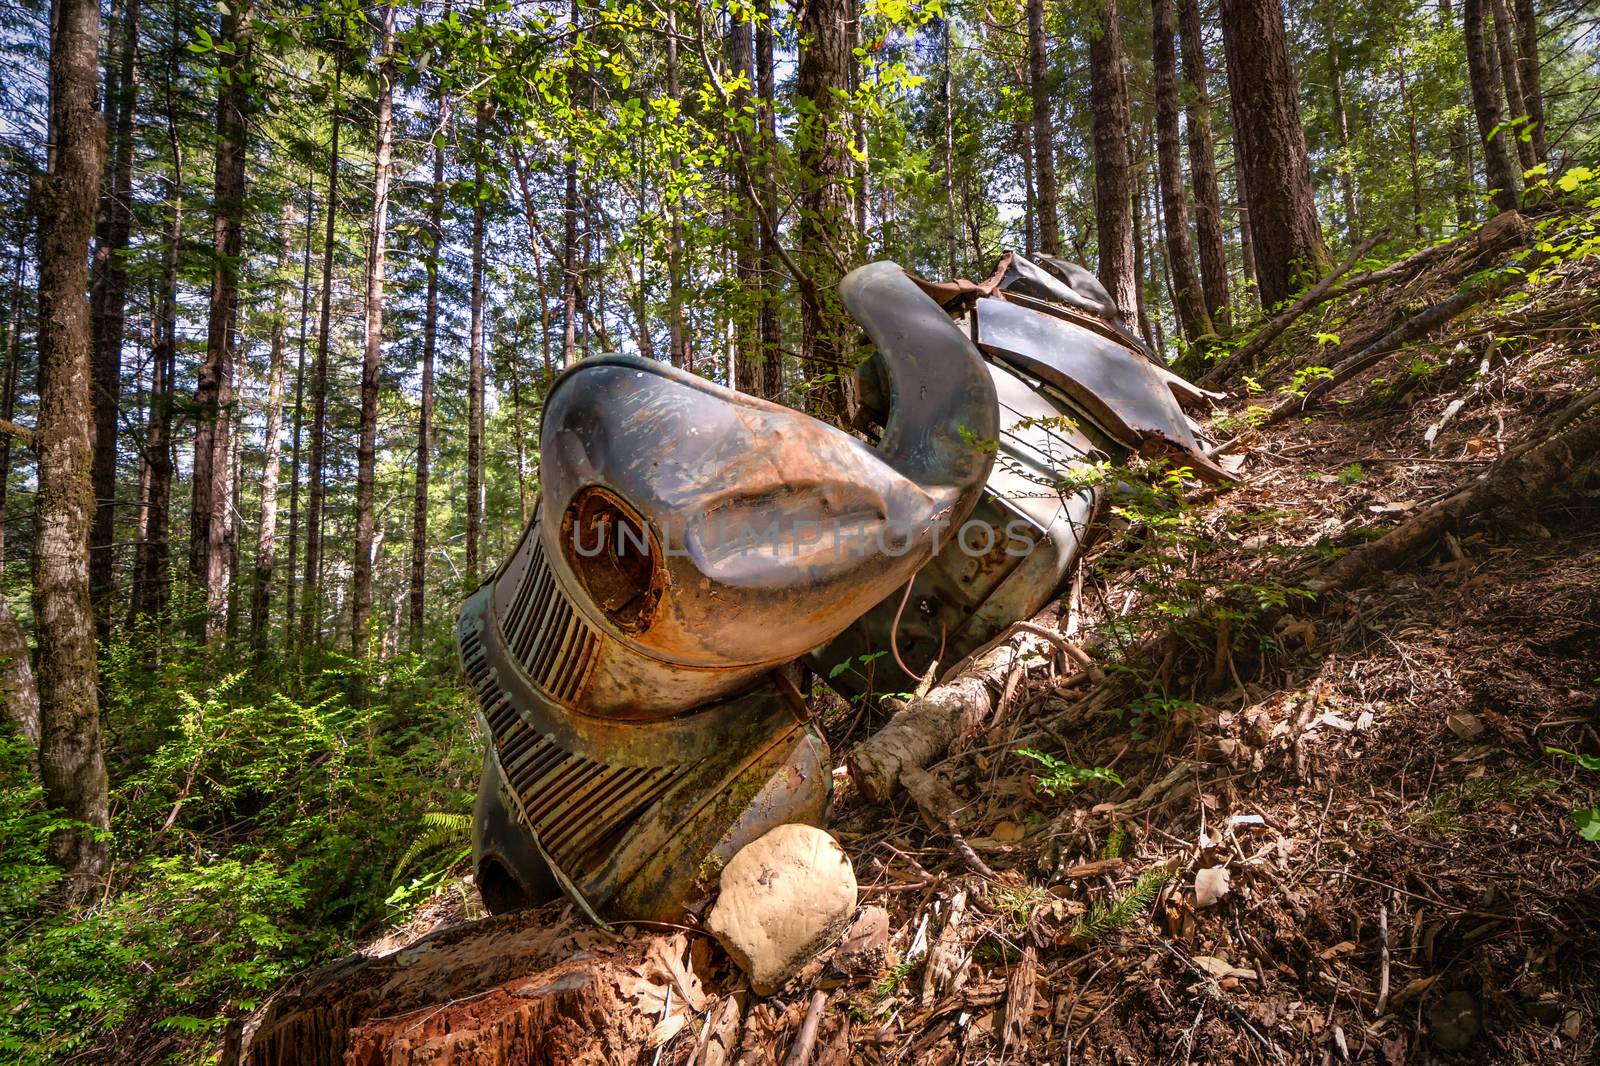 An abandoned classic vehicle rusts in a Northern California forest.